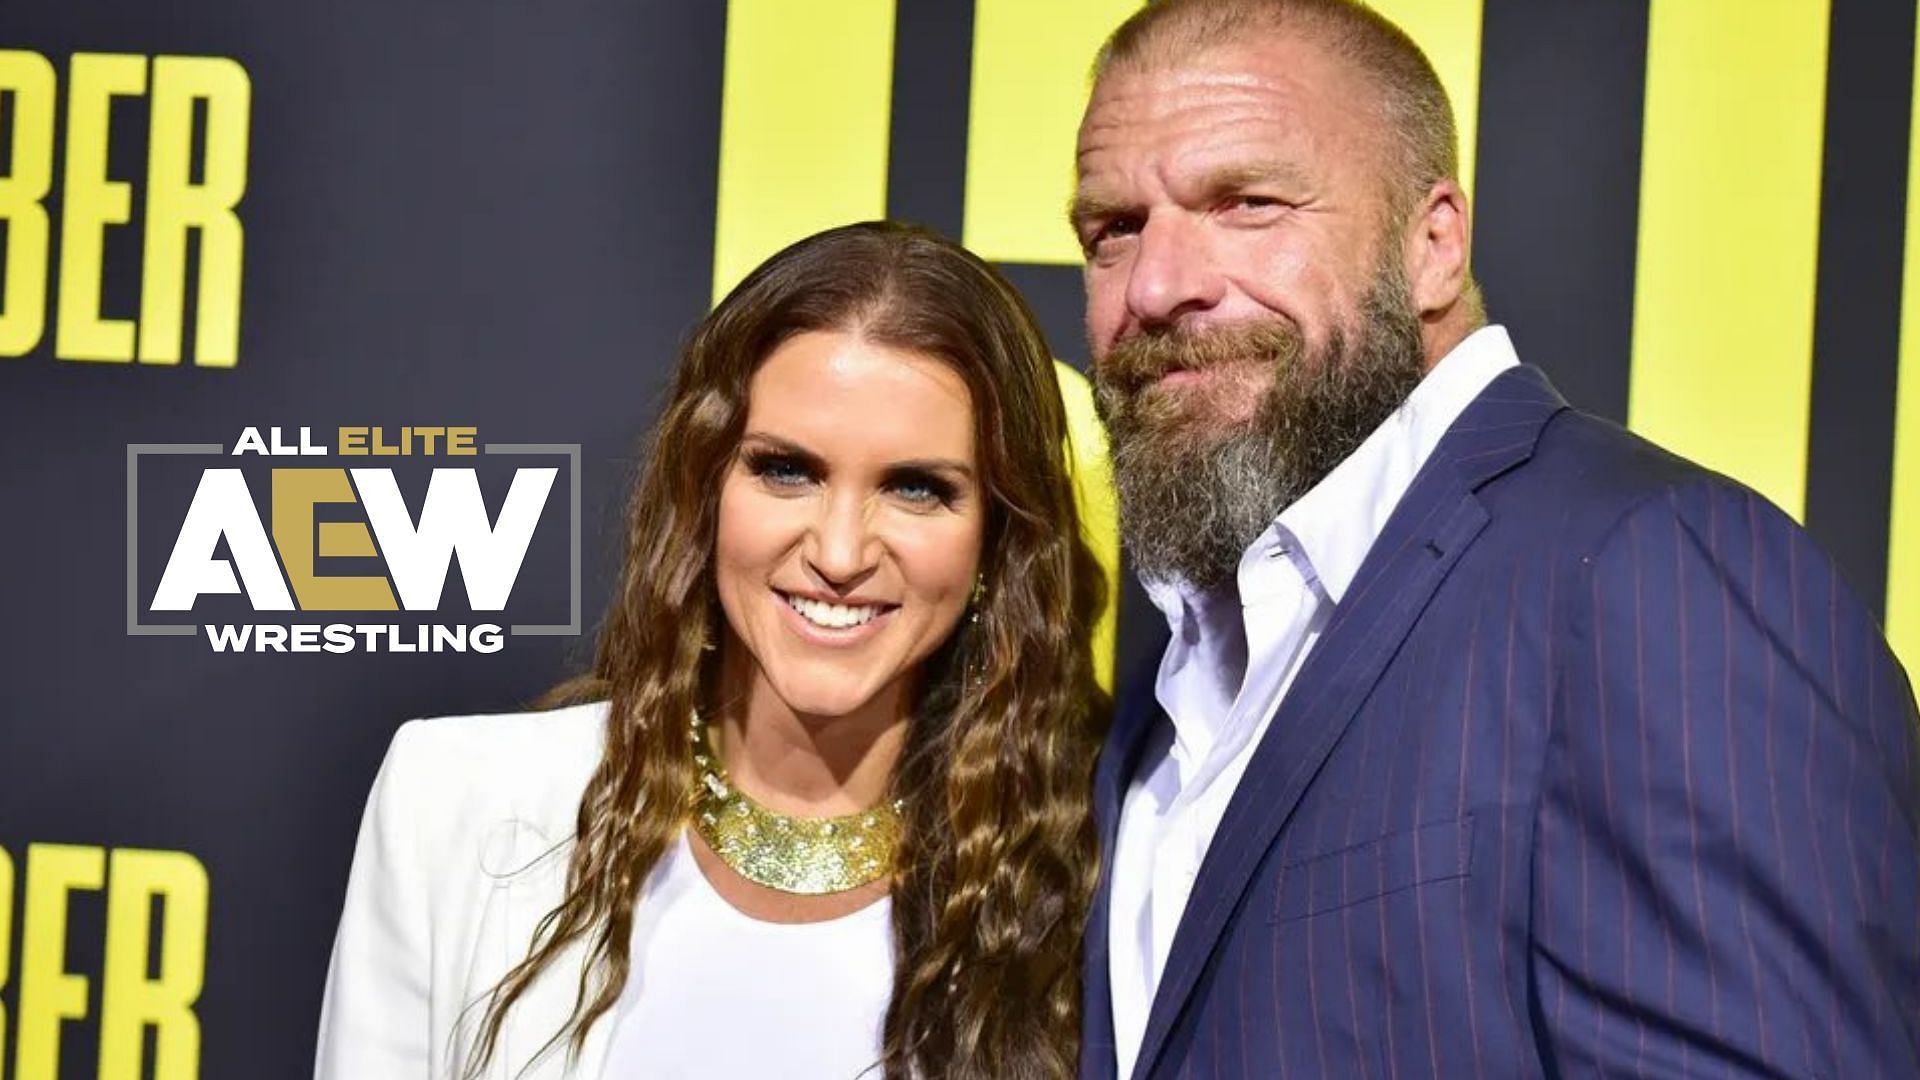 Triple H and Stephanie McMahon sent gifts to this AEW star